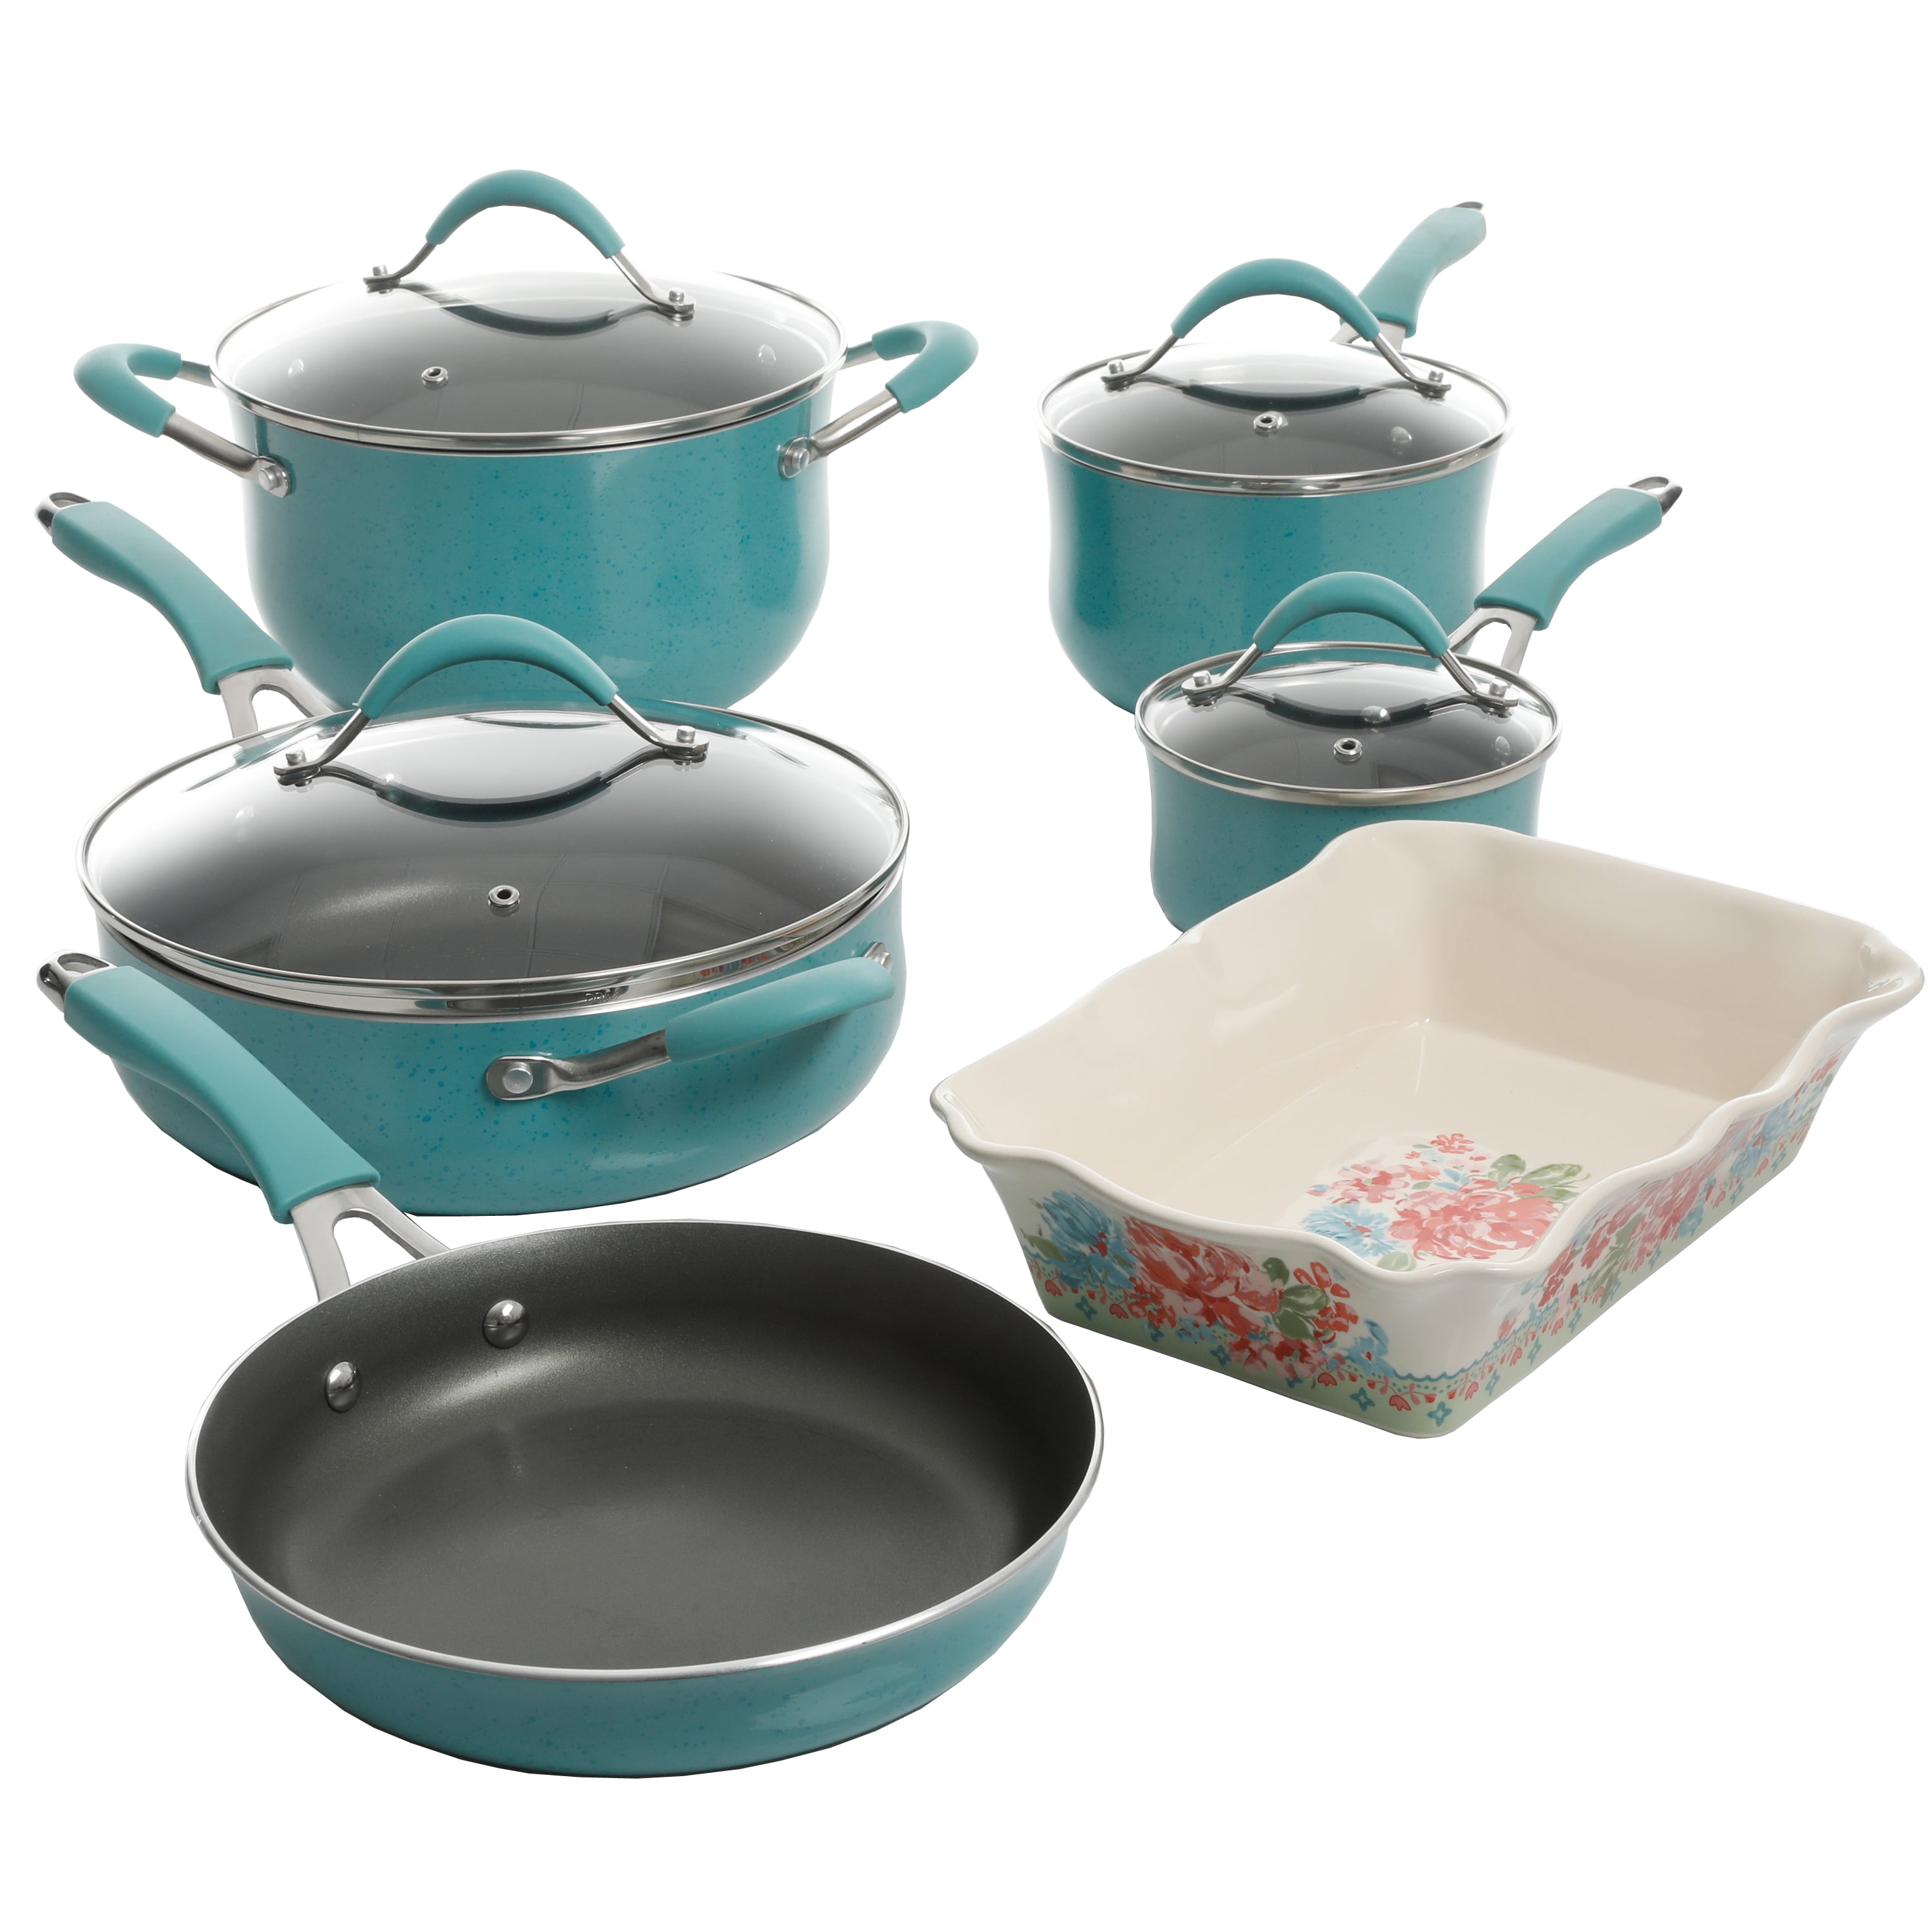 The Pioneer Woman Vintage Speckle 24-Piece Cookware Combo Set in Turquoise bundle with Copper Charm Stainless Steel Copper Bottom Cookware Set 10 Piece 